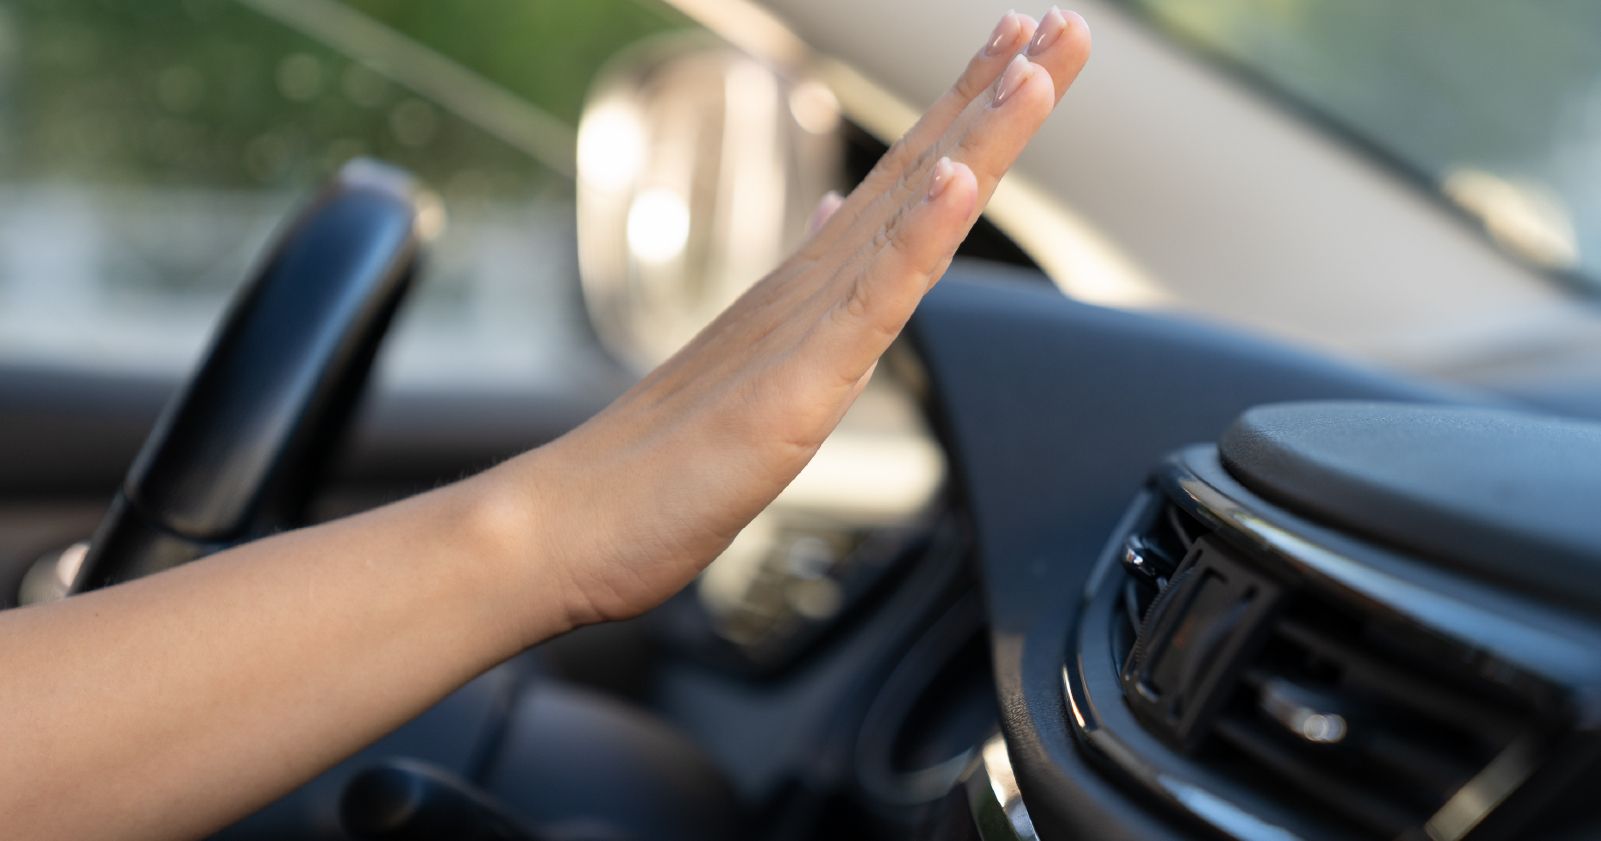 A woman is giving a high five while driving a car.